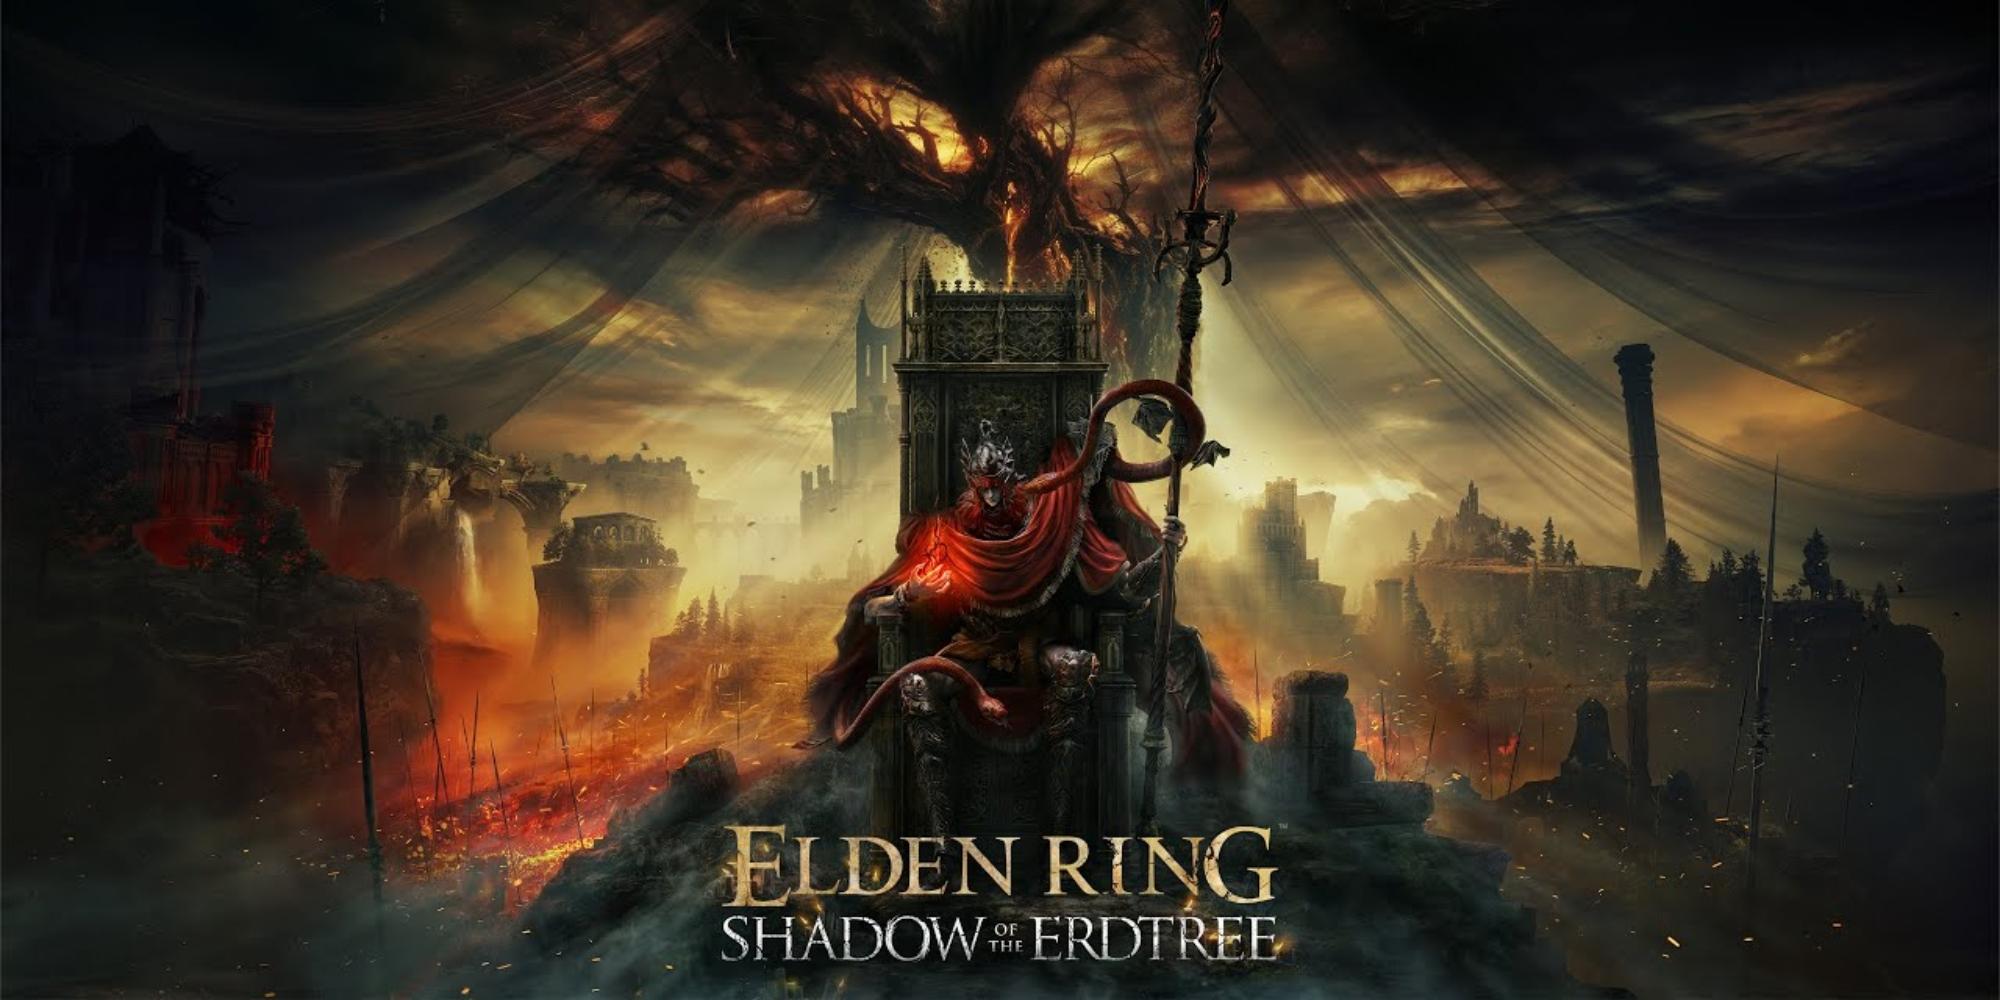 Cover Image for Elden Ring Shadow of the Erdtree: Aventure-se nas Terras Sombrias